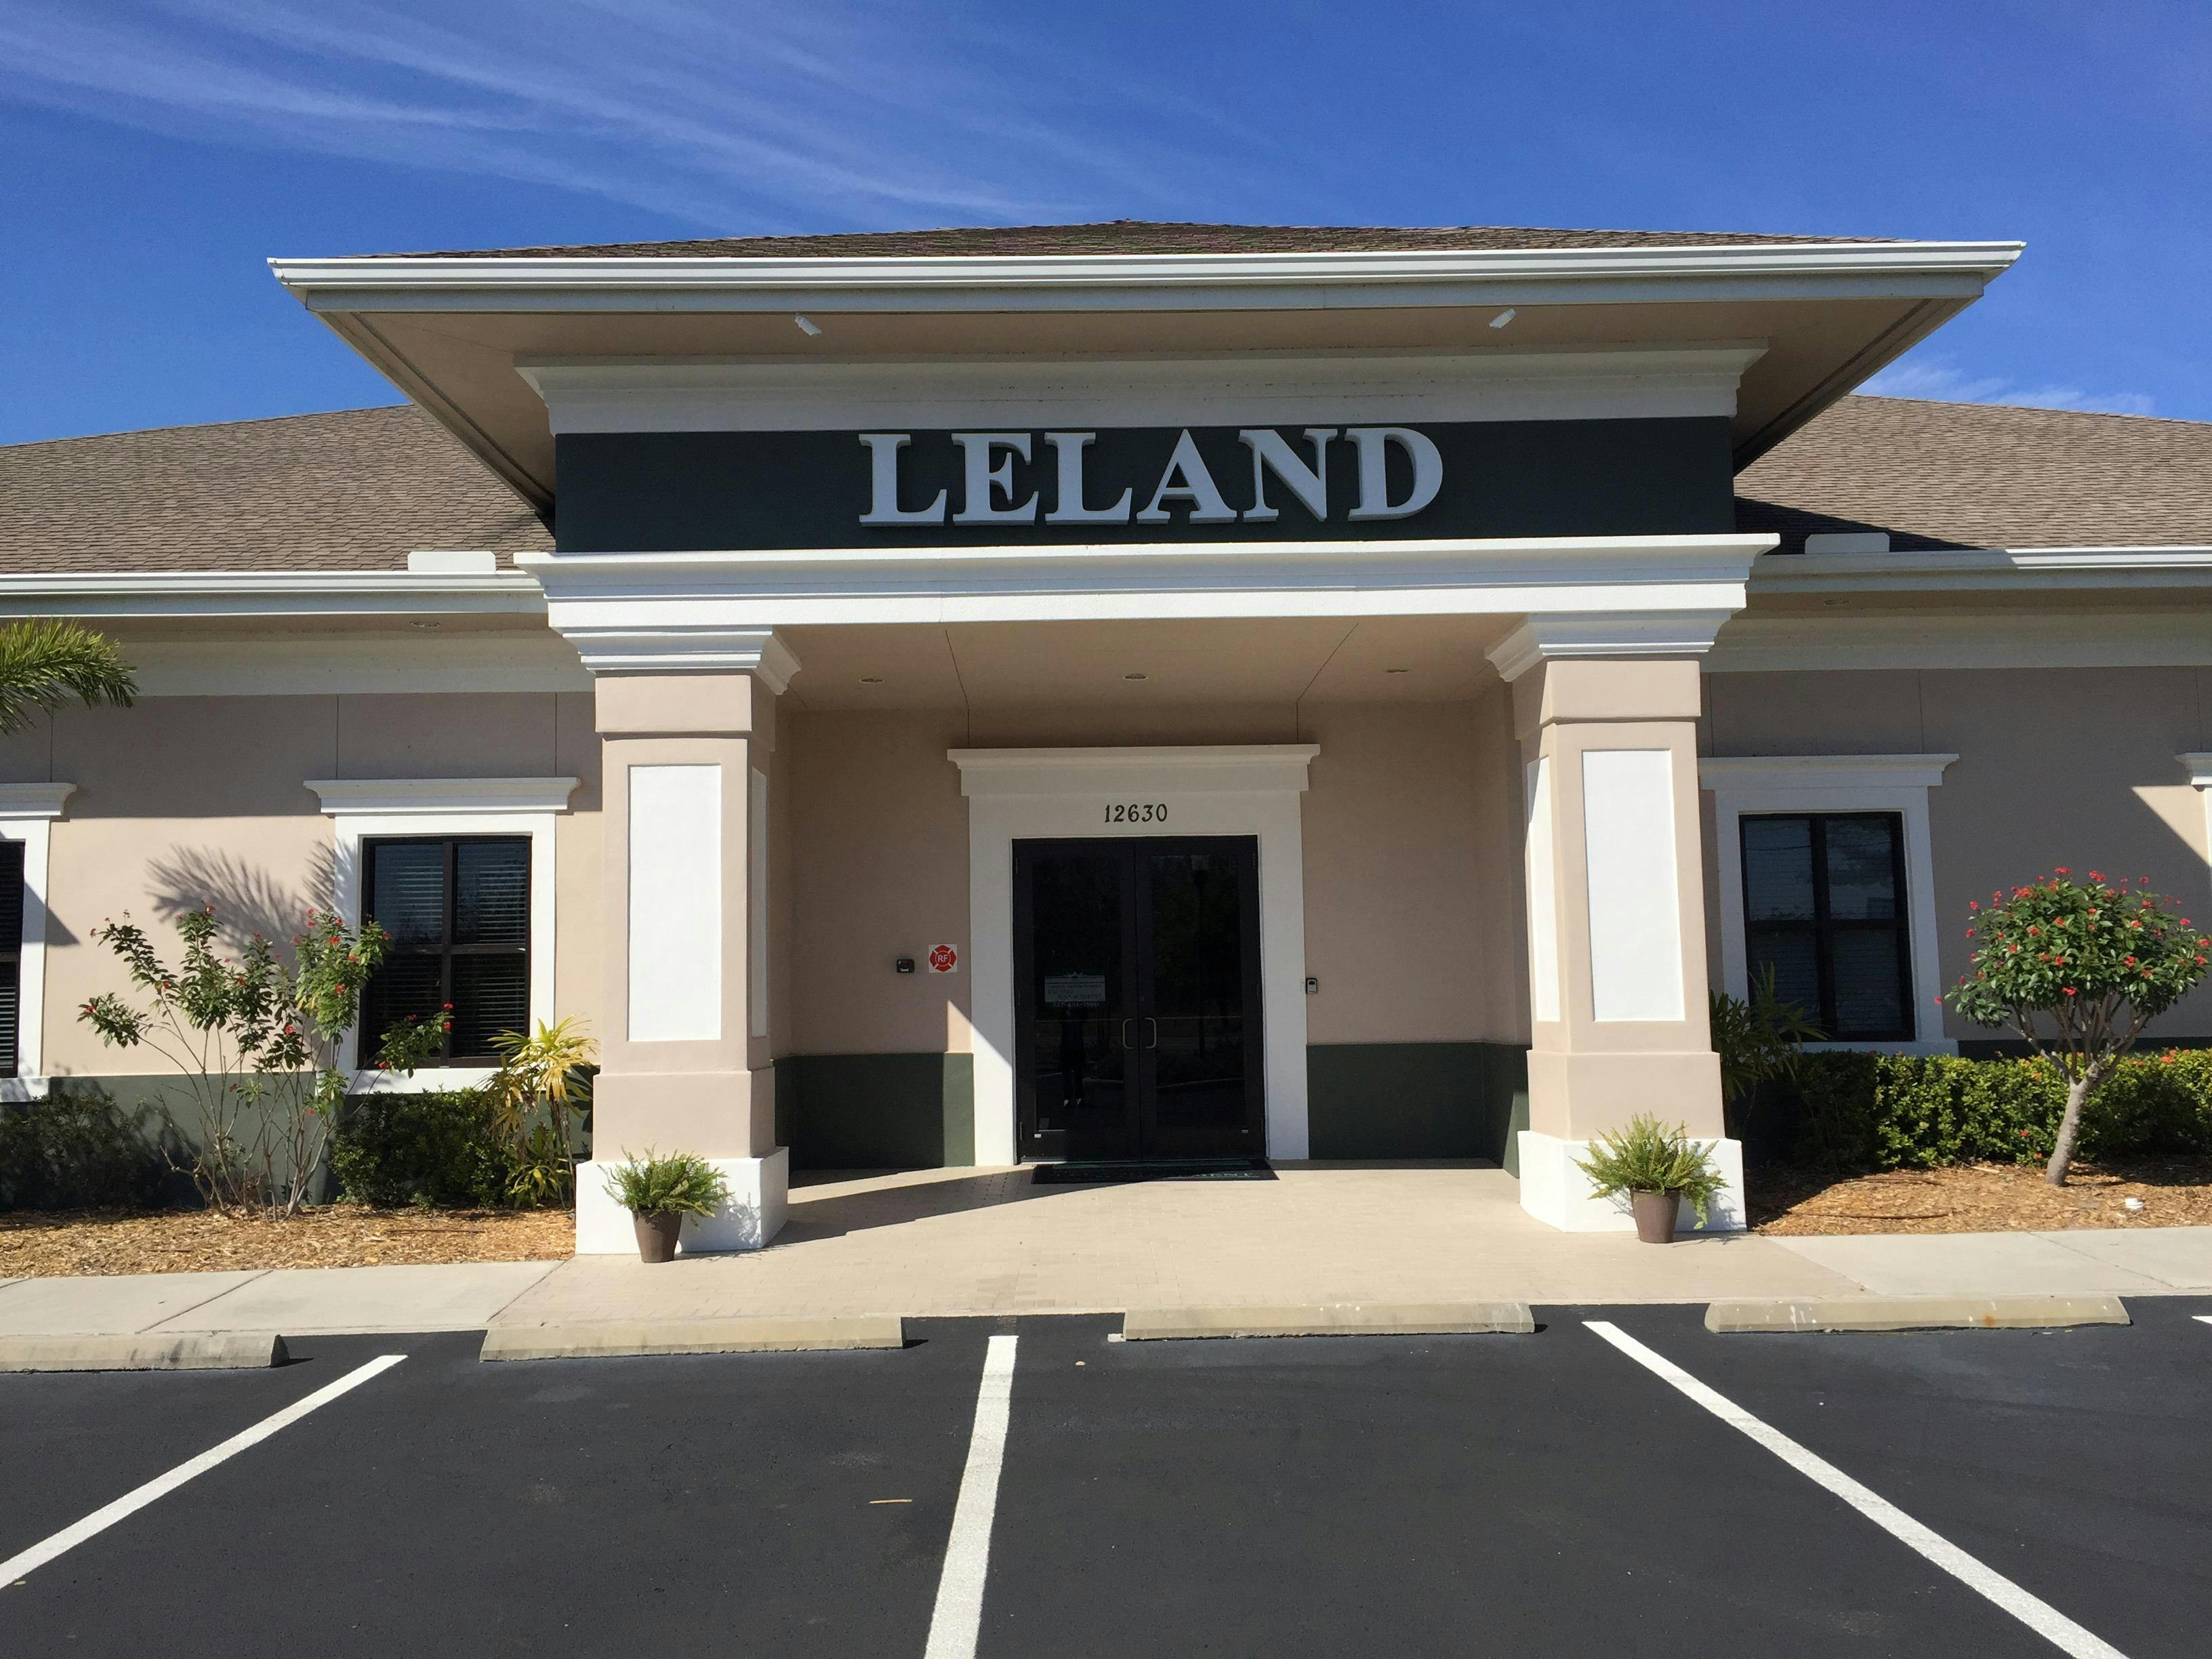 Leland Management Board Certification Course - Tampa